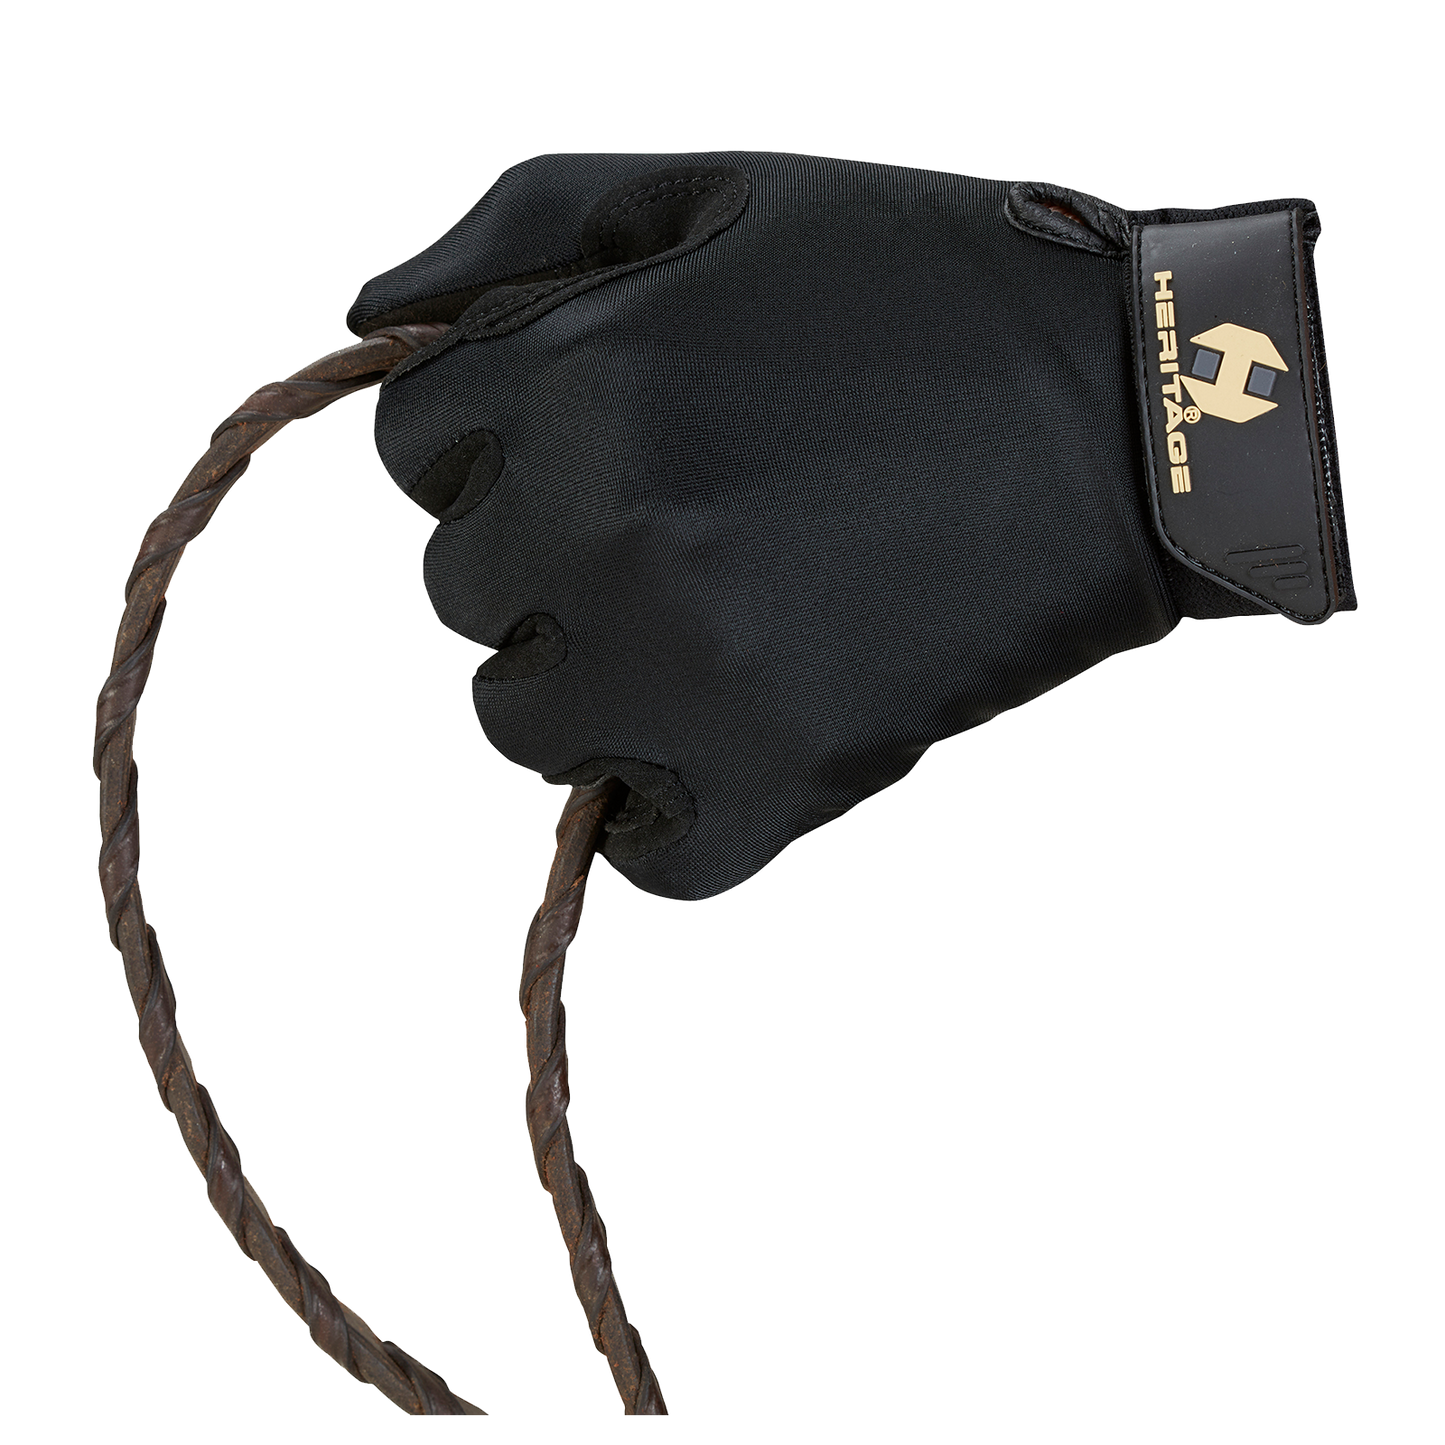 Heritage Performance Gloves BLACK ONLY Knit top - DISCONTINUED